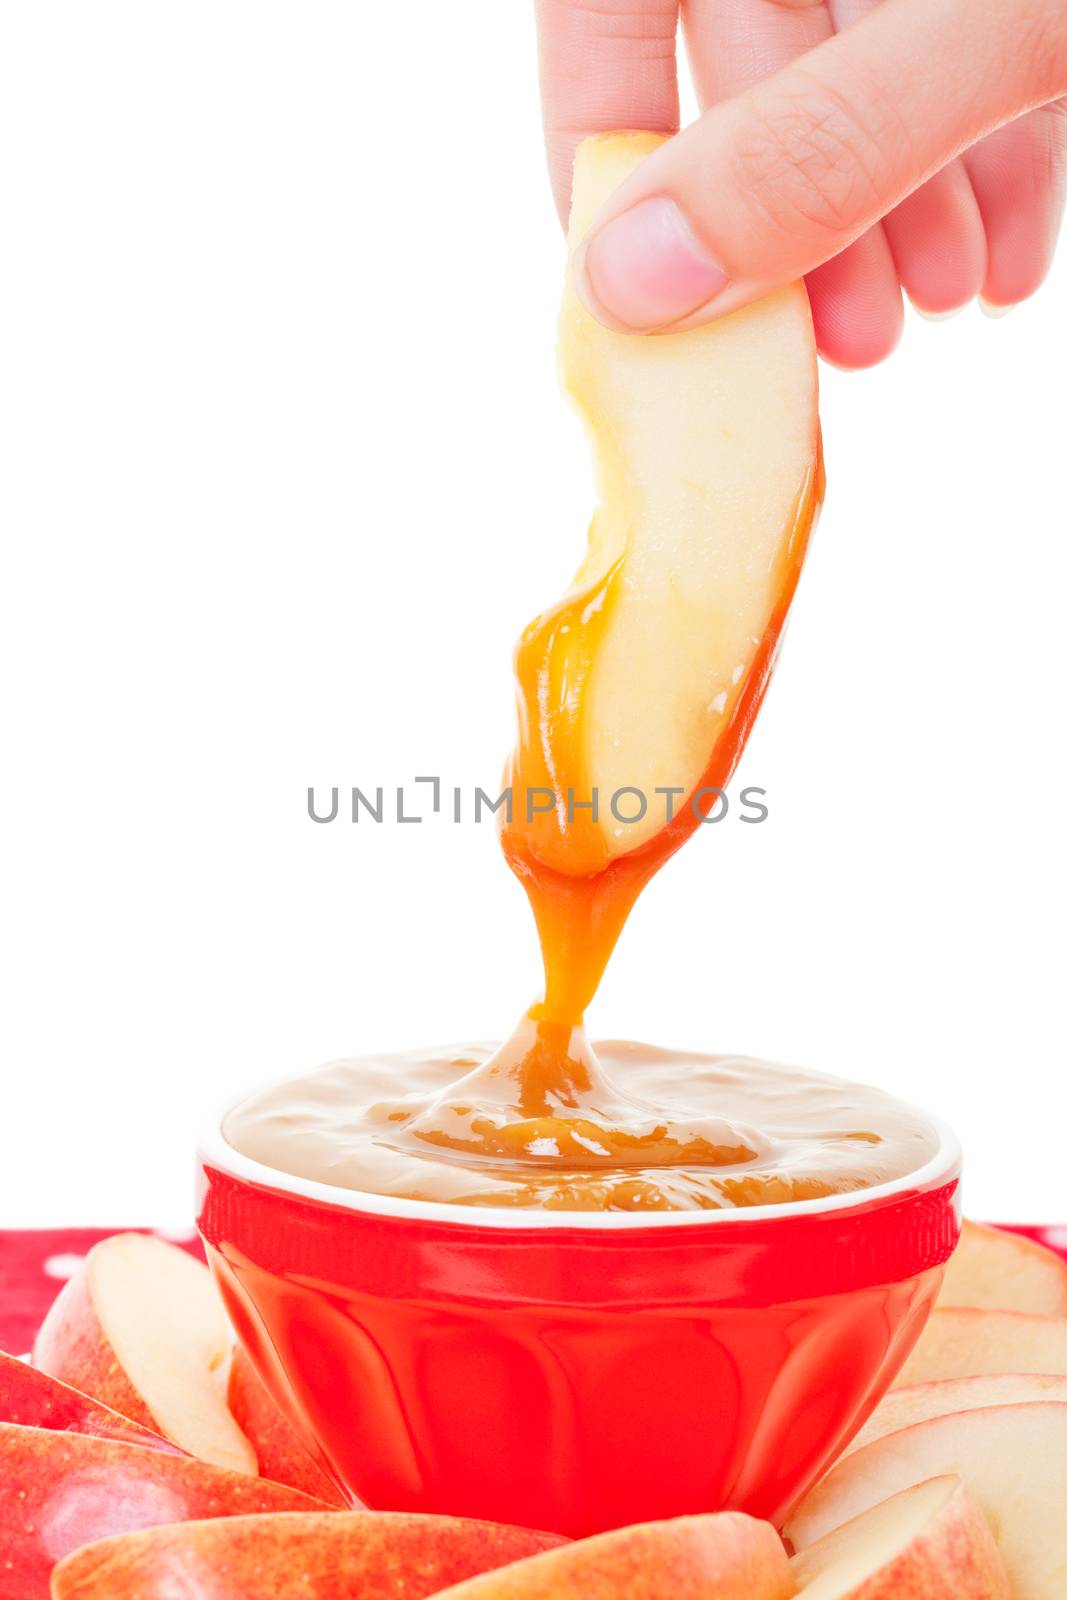 A slice of fresh apple being dipped into smooth, buttery caramel dip.  Shot on white background.